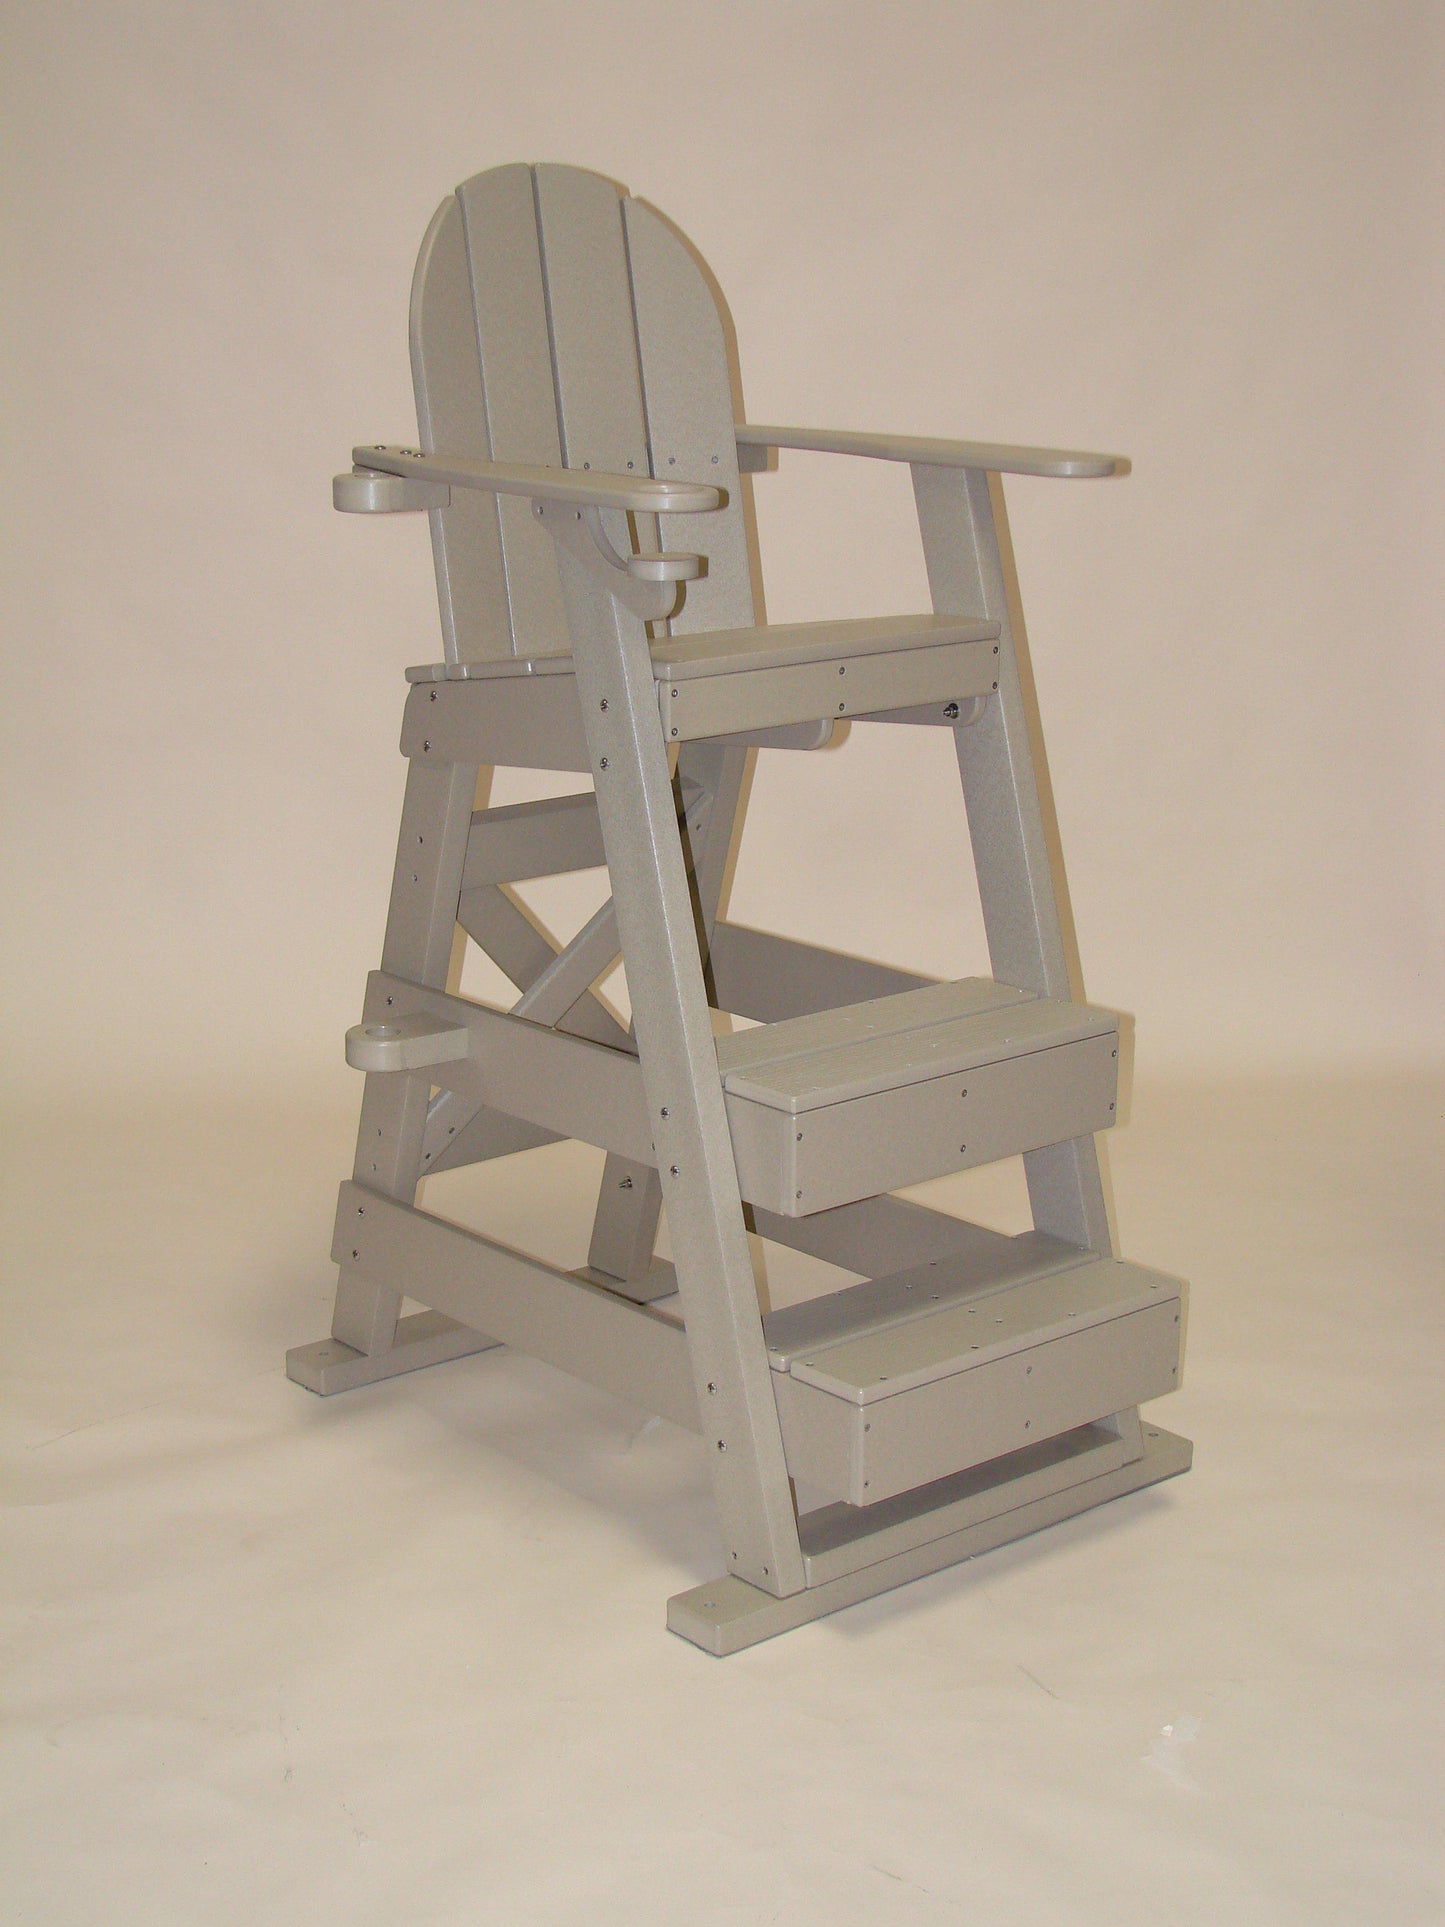 Tailwind Furniture Recycled Plastic Lifeguard Chair - LG-510 - Seat Height: 40" - LEAD TIME TO SHIP 10 TO 12 BUSINESS DAYS